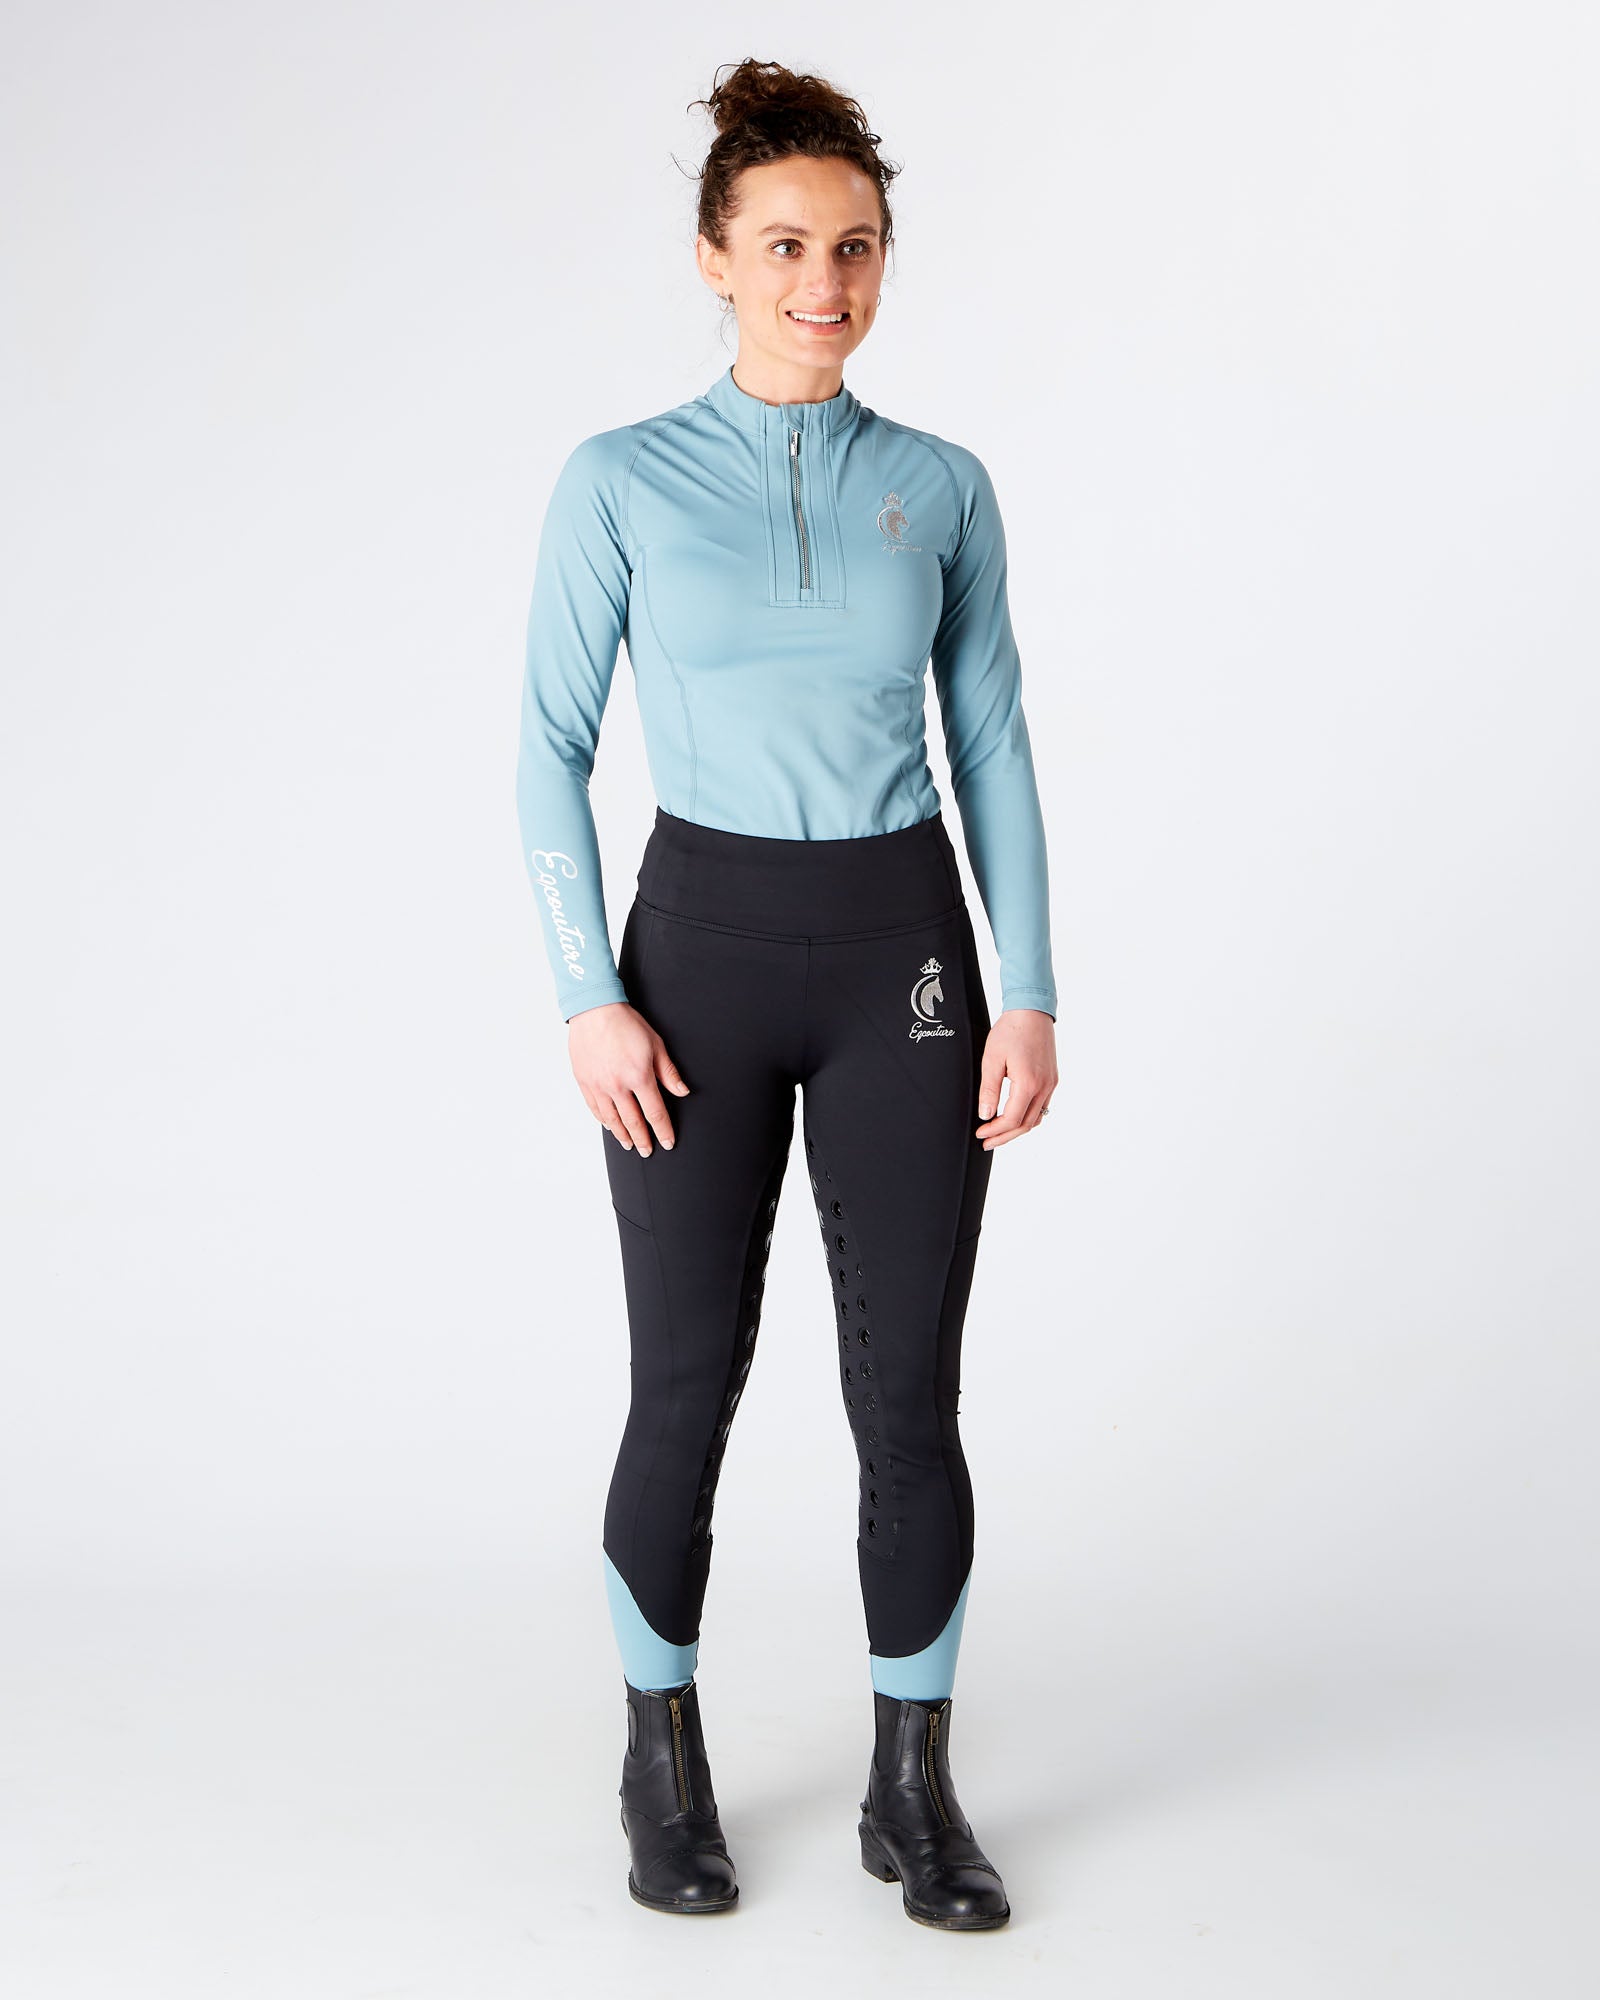 Womens Equestrian long sleeve BLUE riding top / base layer / sports horse riding top- Eqcouture.